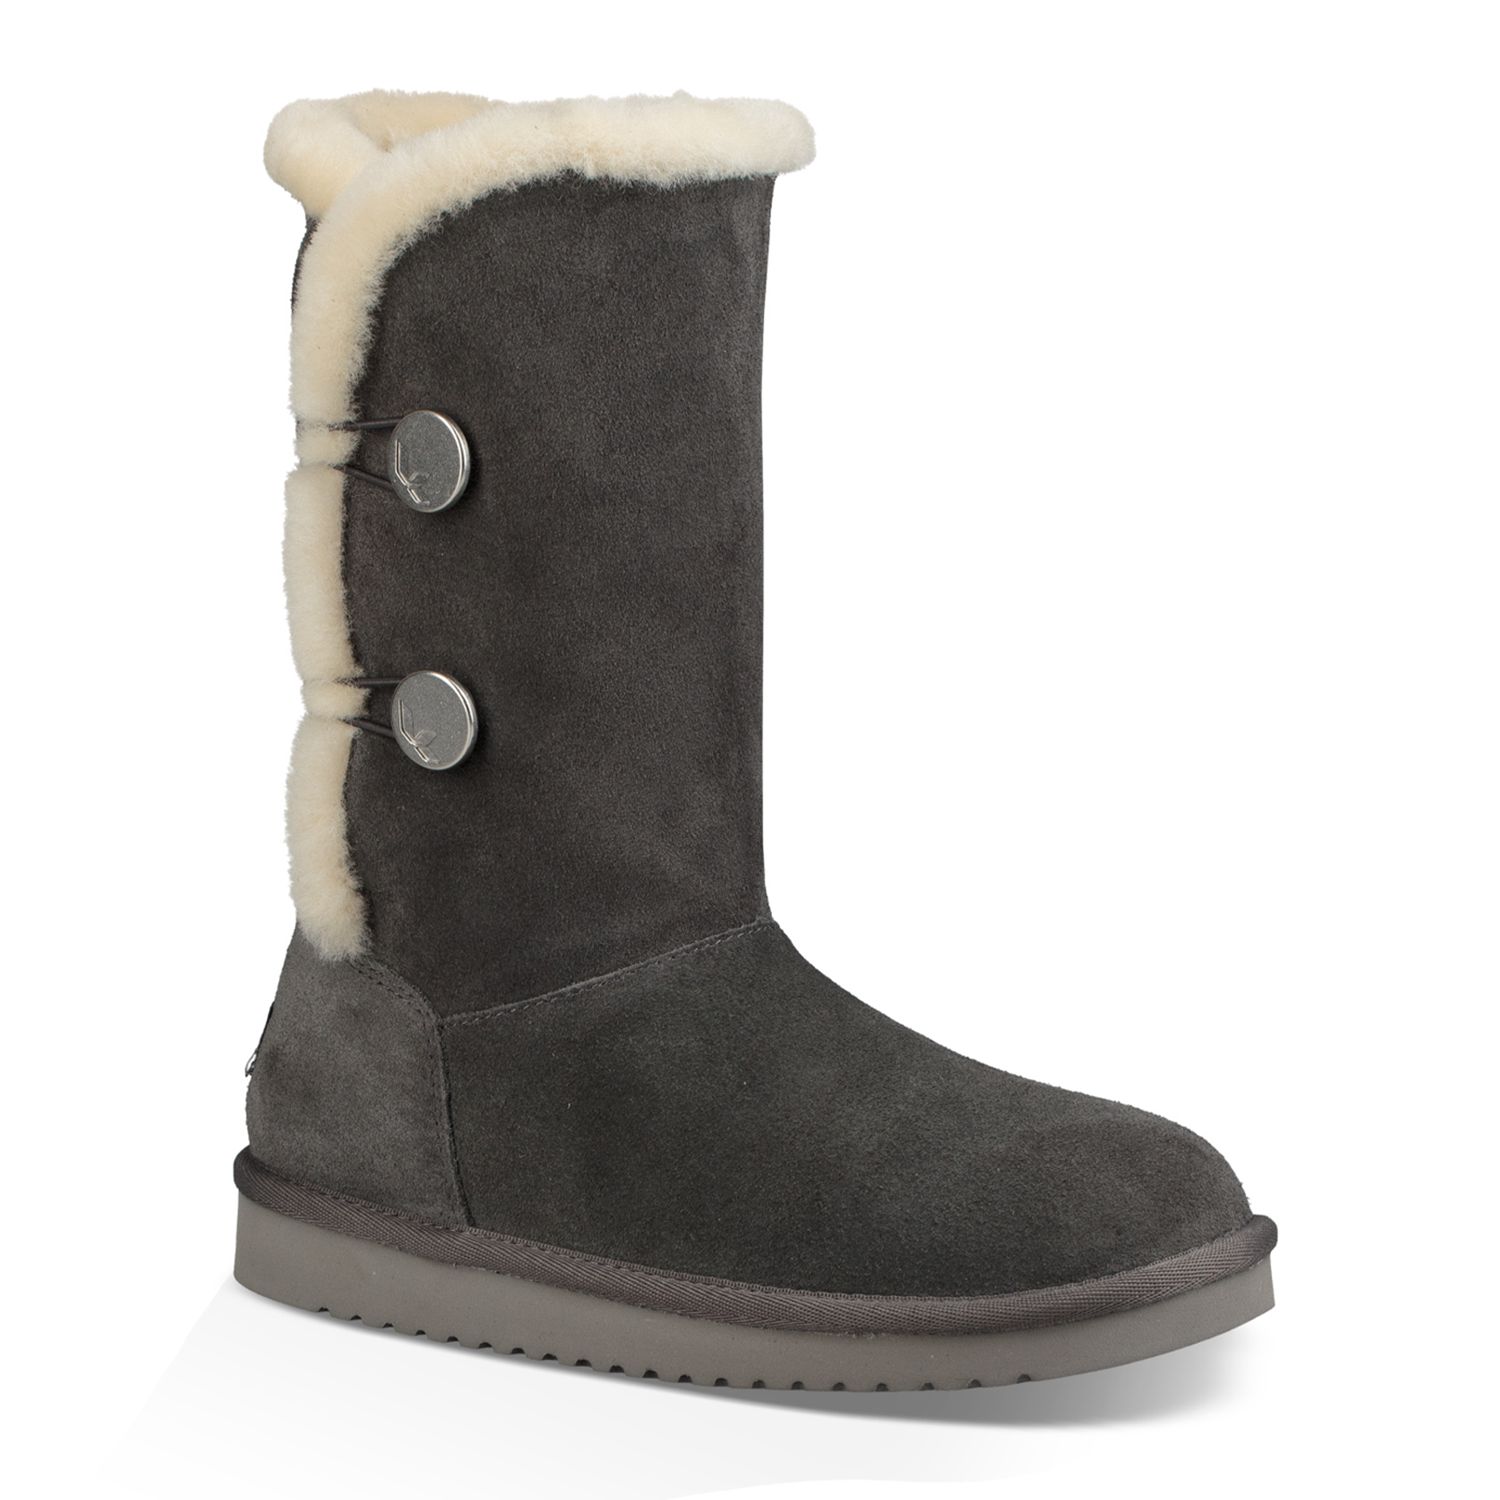 ugg boots at kohl's